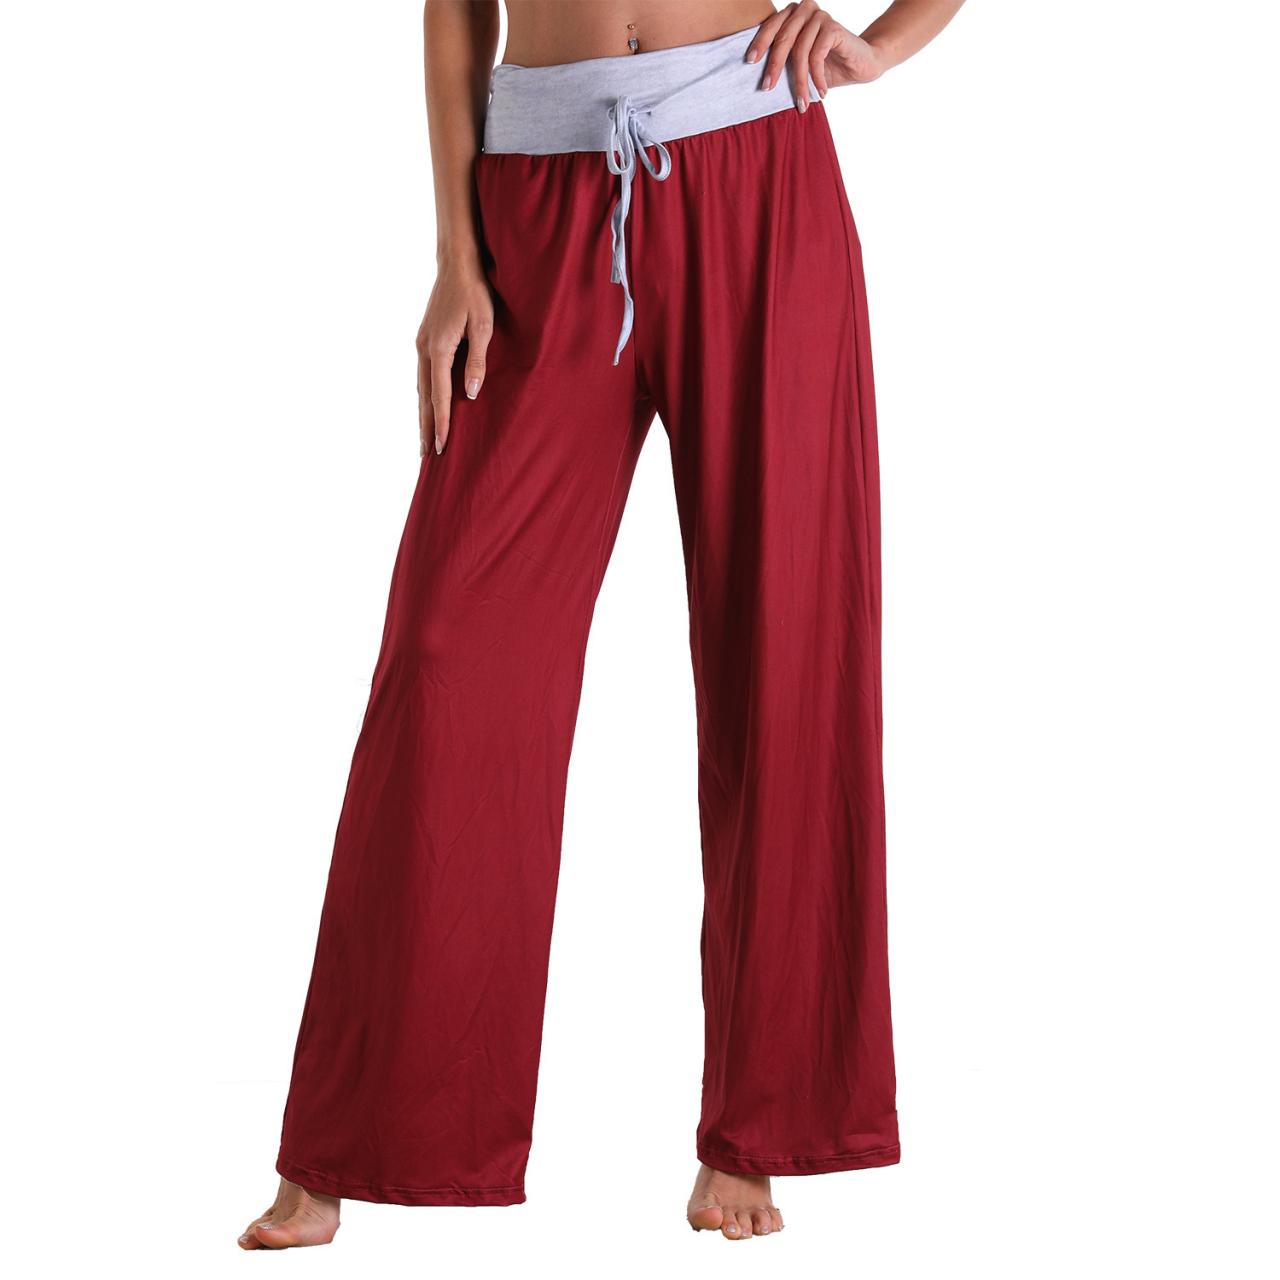 Leisure Sports Workout Gym Fitness Women Elastic Drawstring Sweatpants Trousers Loose Fit Strap Red Solid Color Pants